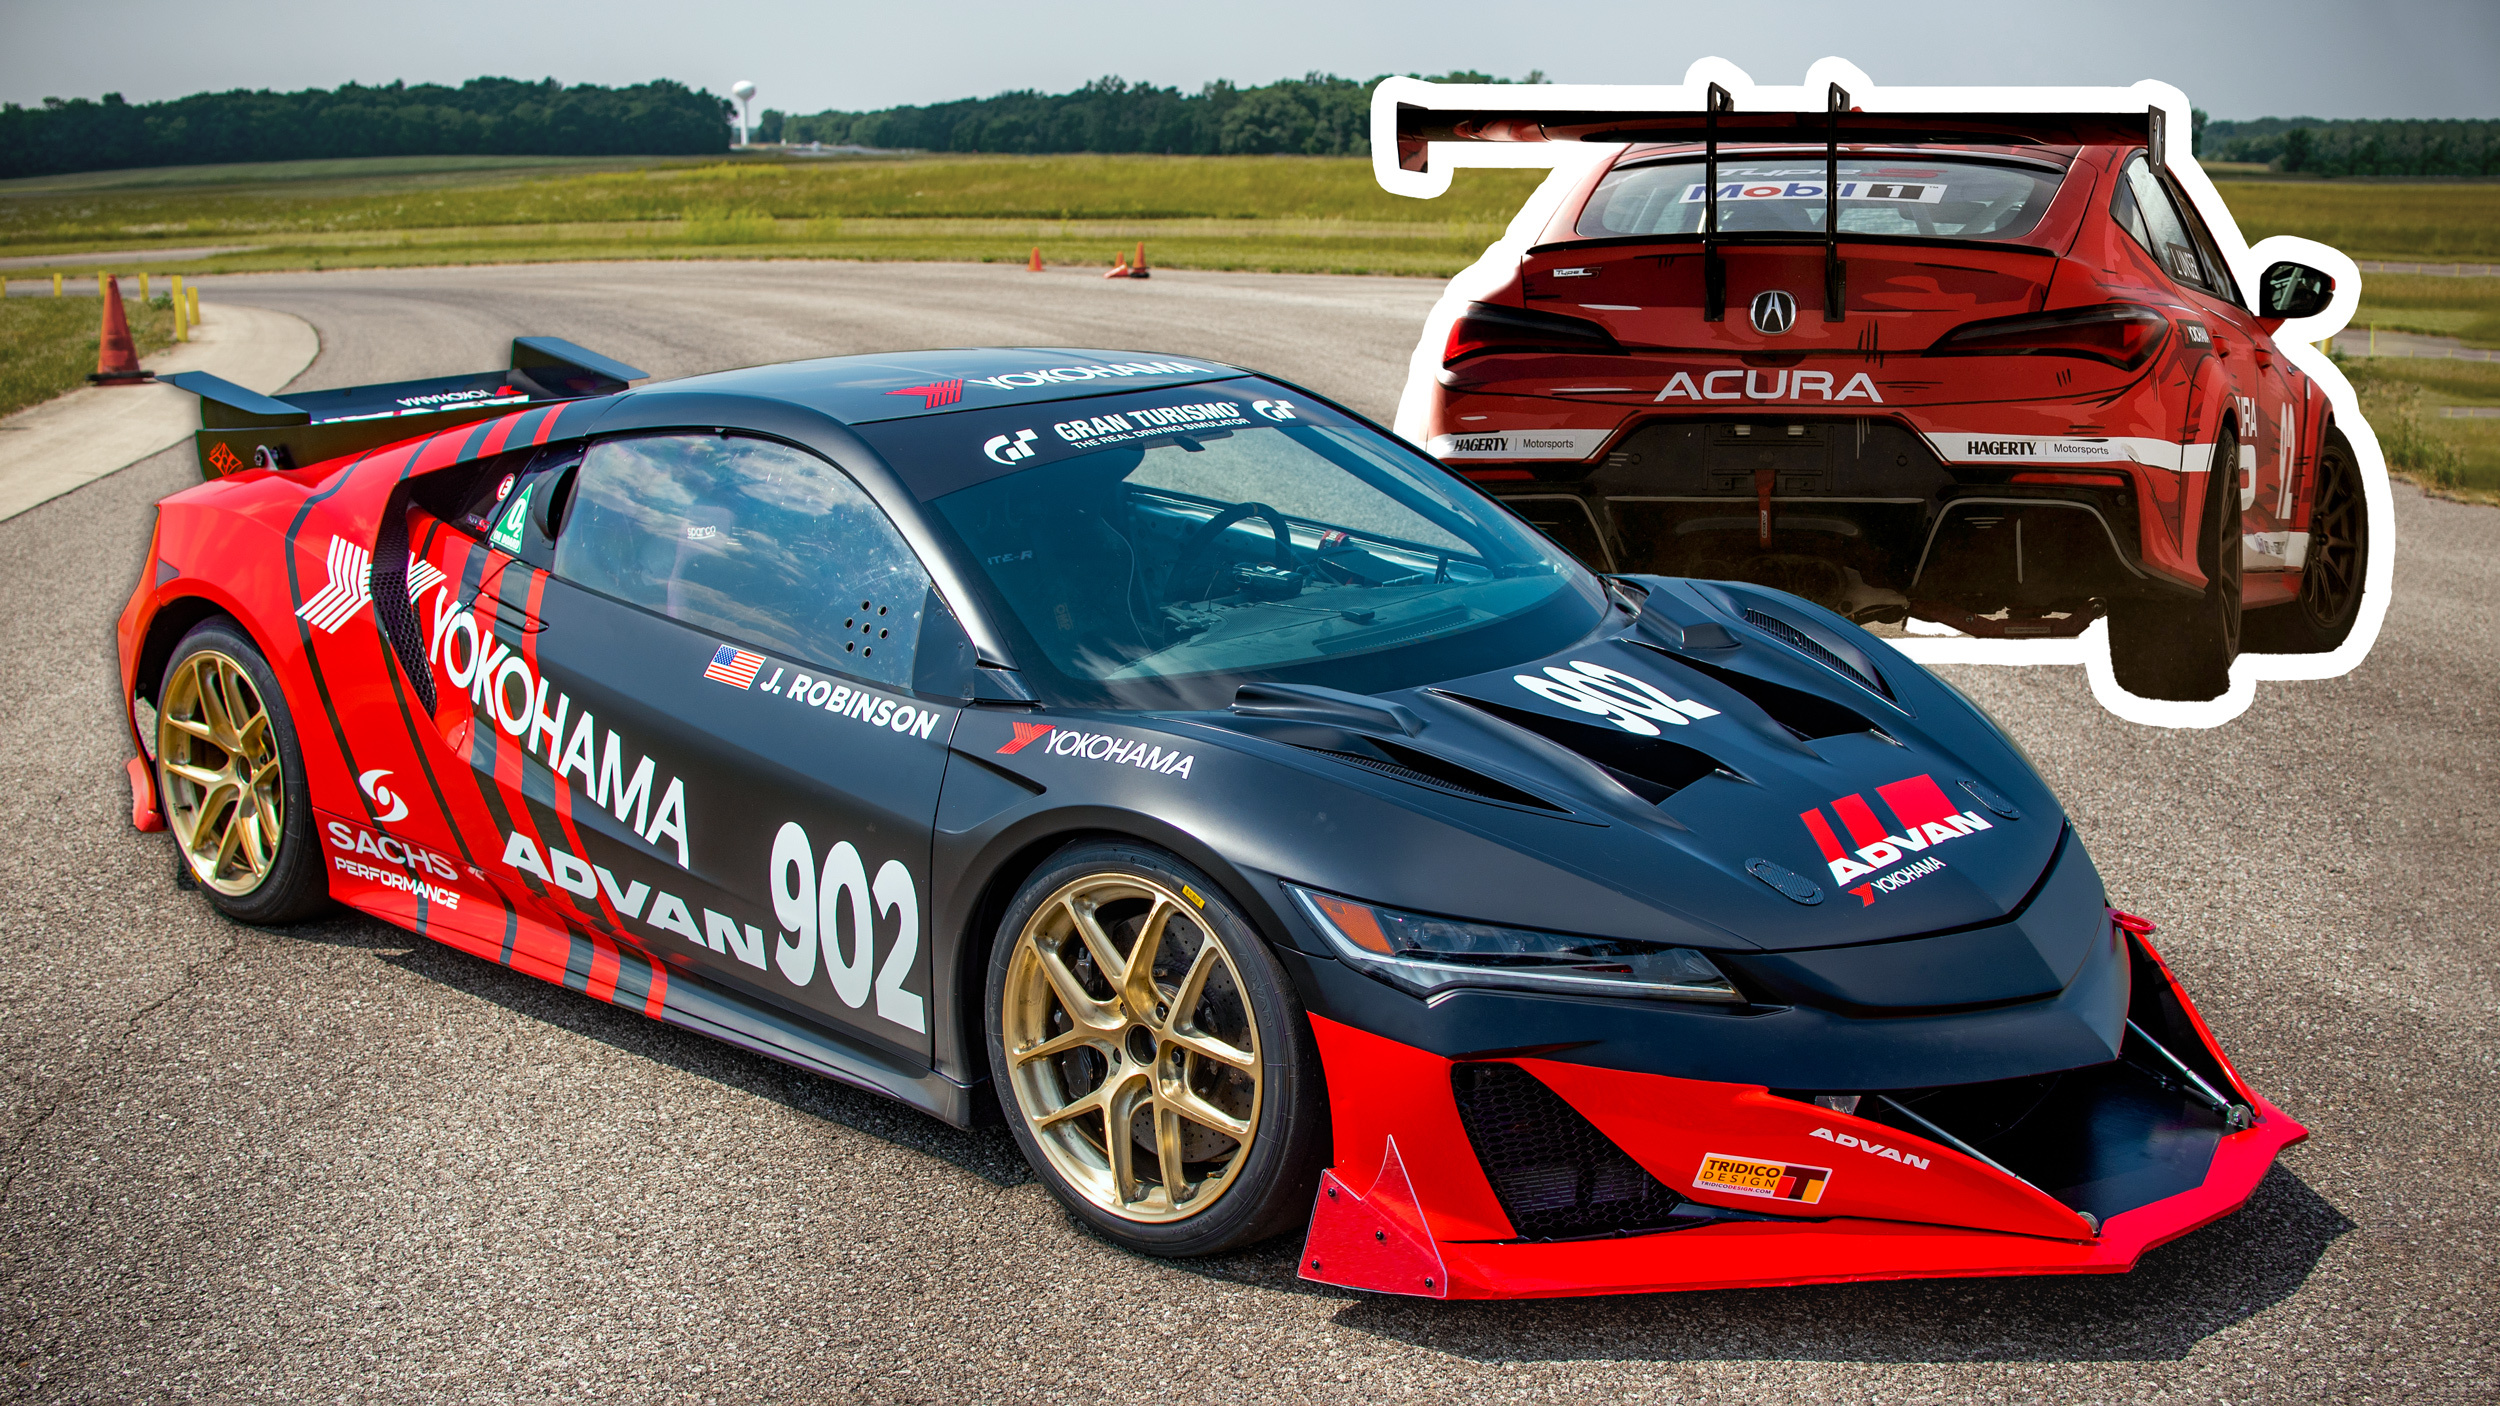 Acura Test Mule Becomes Trailer For NSX Type S